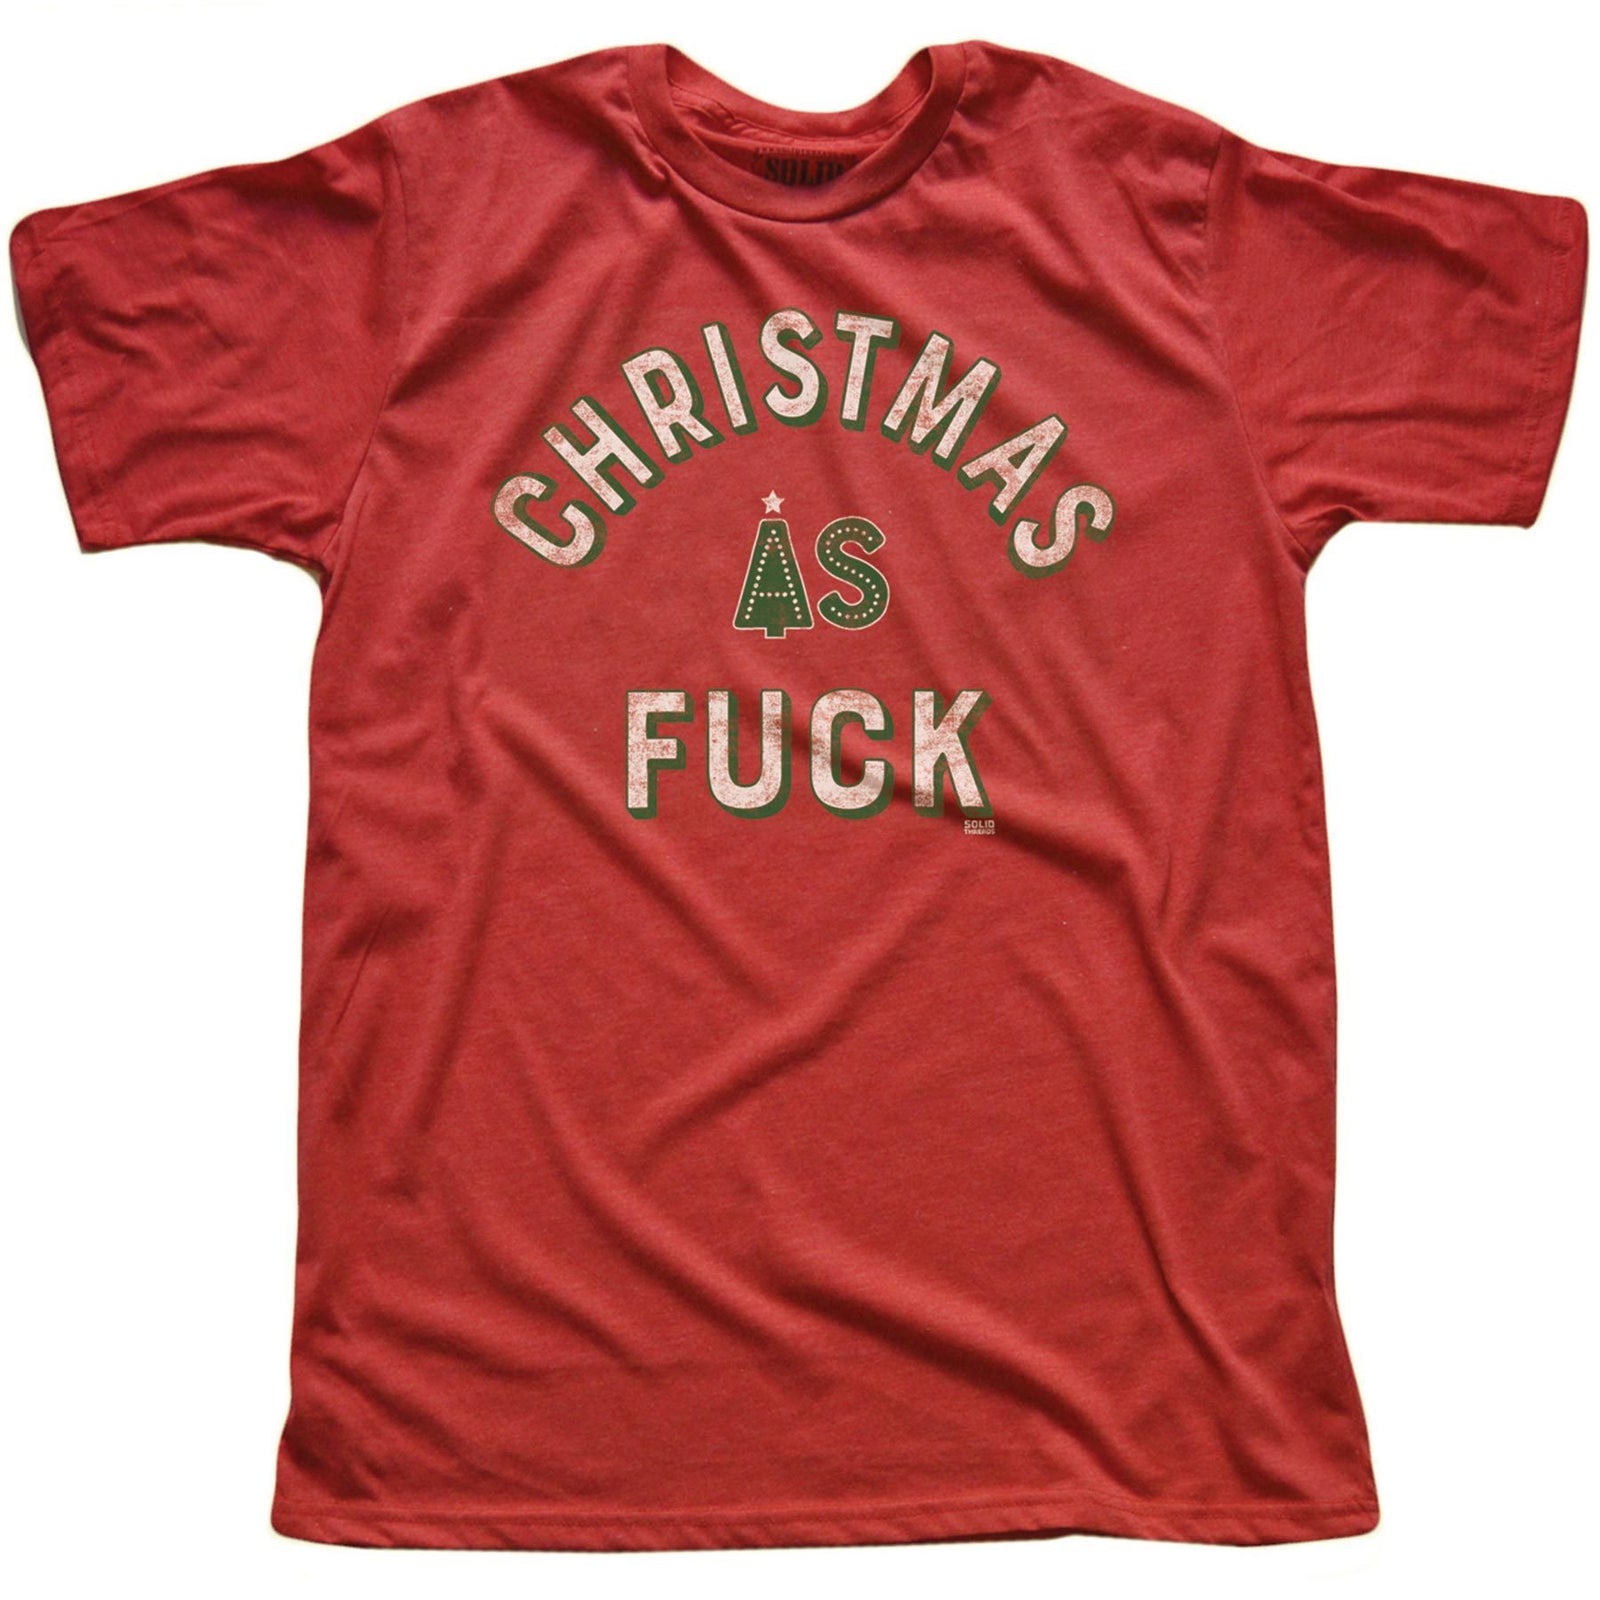 Men's Christmas As Fuck Vintage Graphic T-Shirt | Funny Holiday Party Tee | Solid Threads